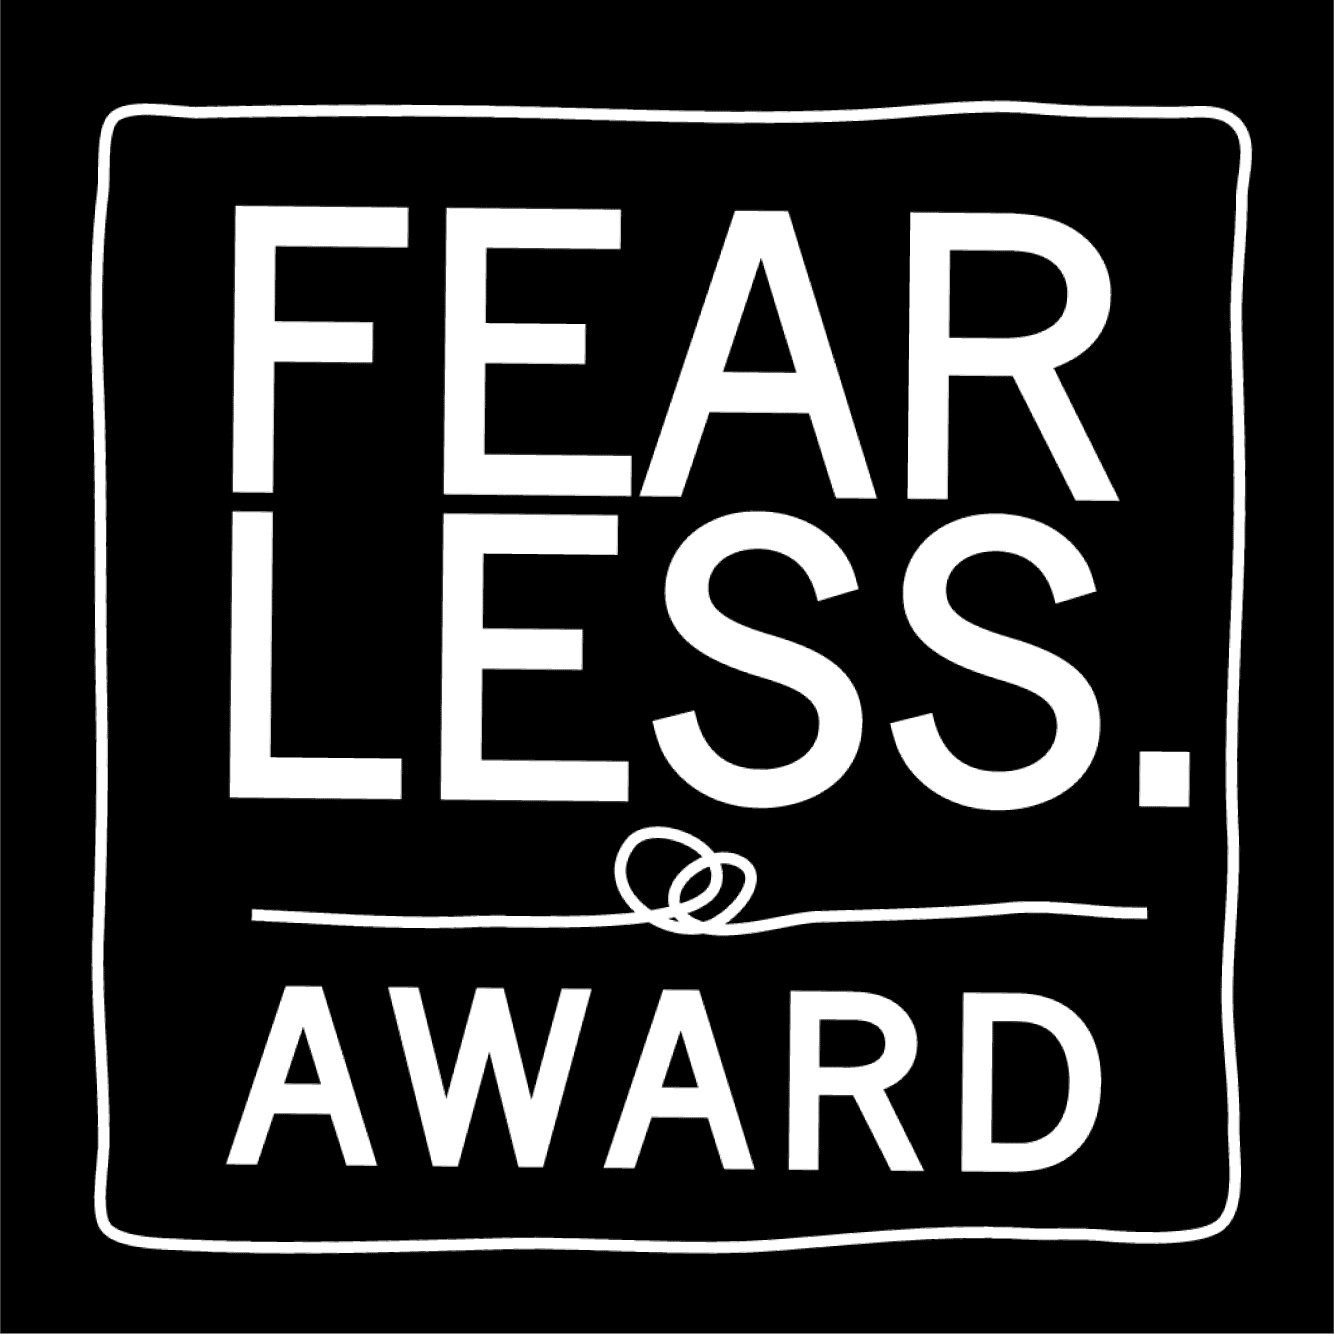 Fearless award logo on a black background for Fearless award 2023.